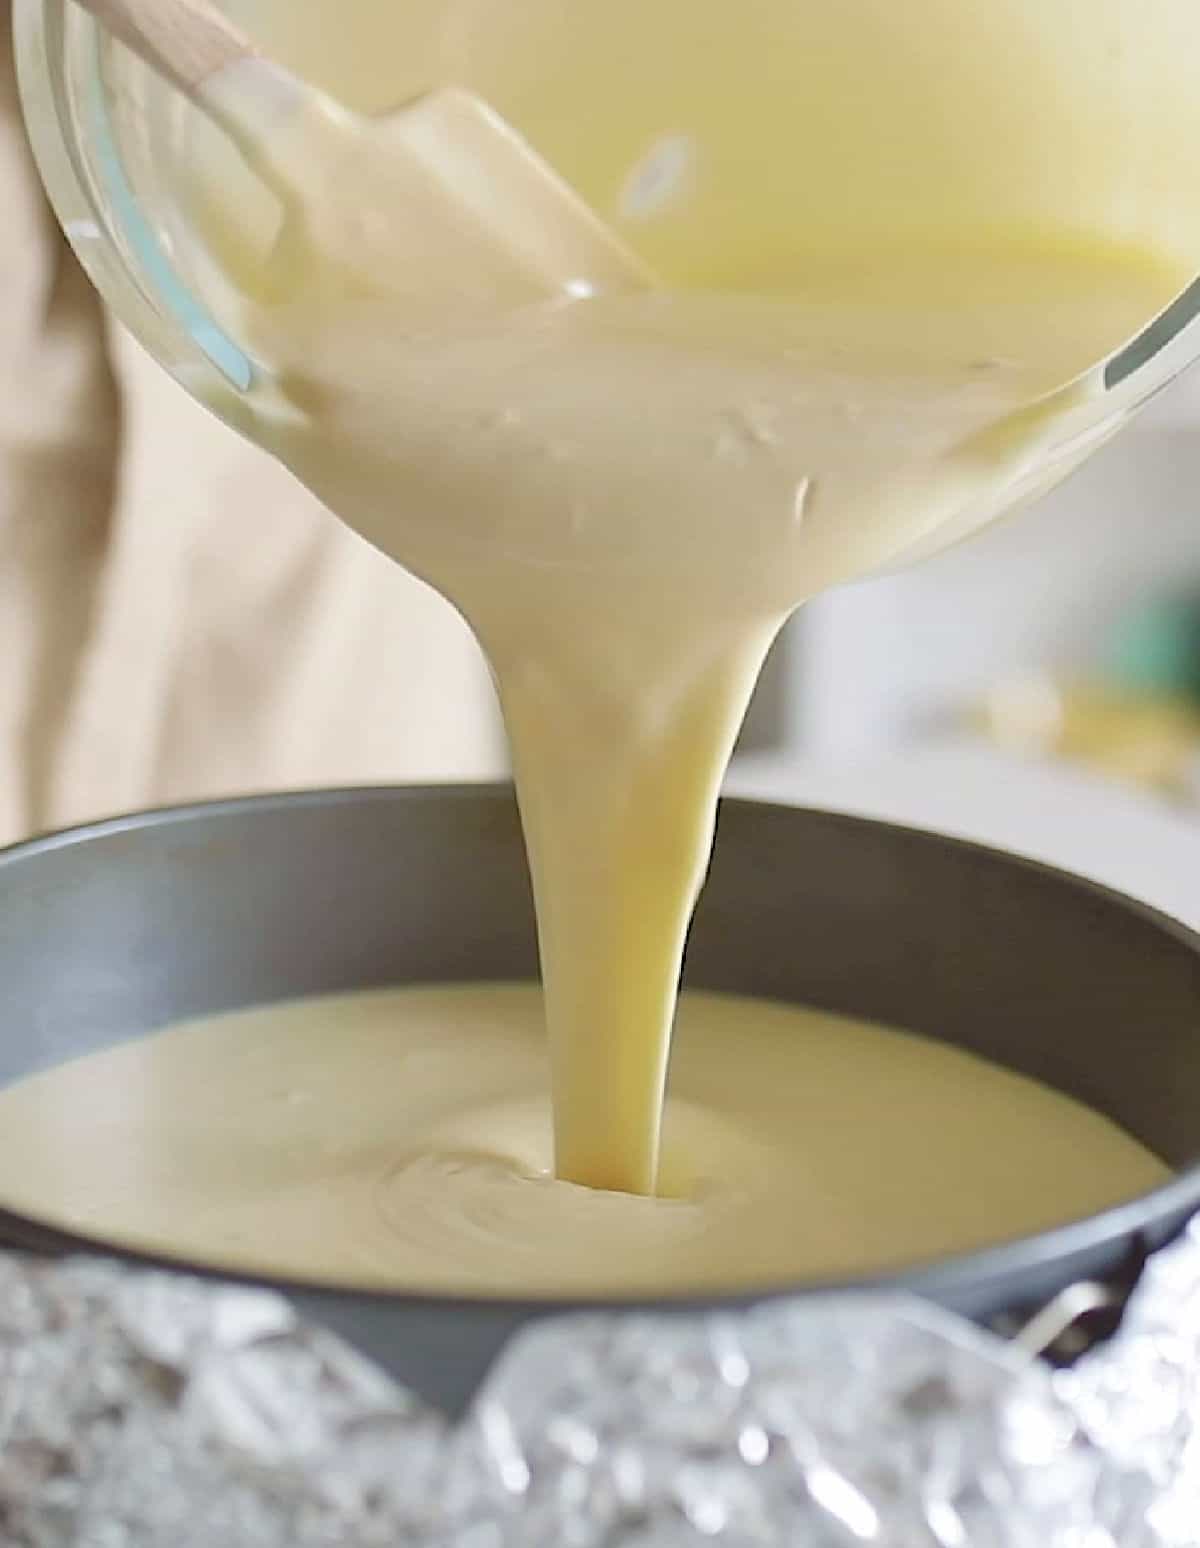 Pouring cheesecake mixture into round cake pan lined with aluminum foil.